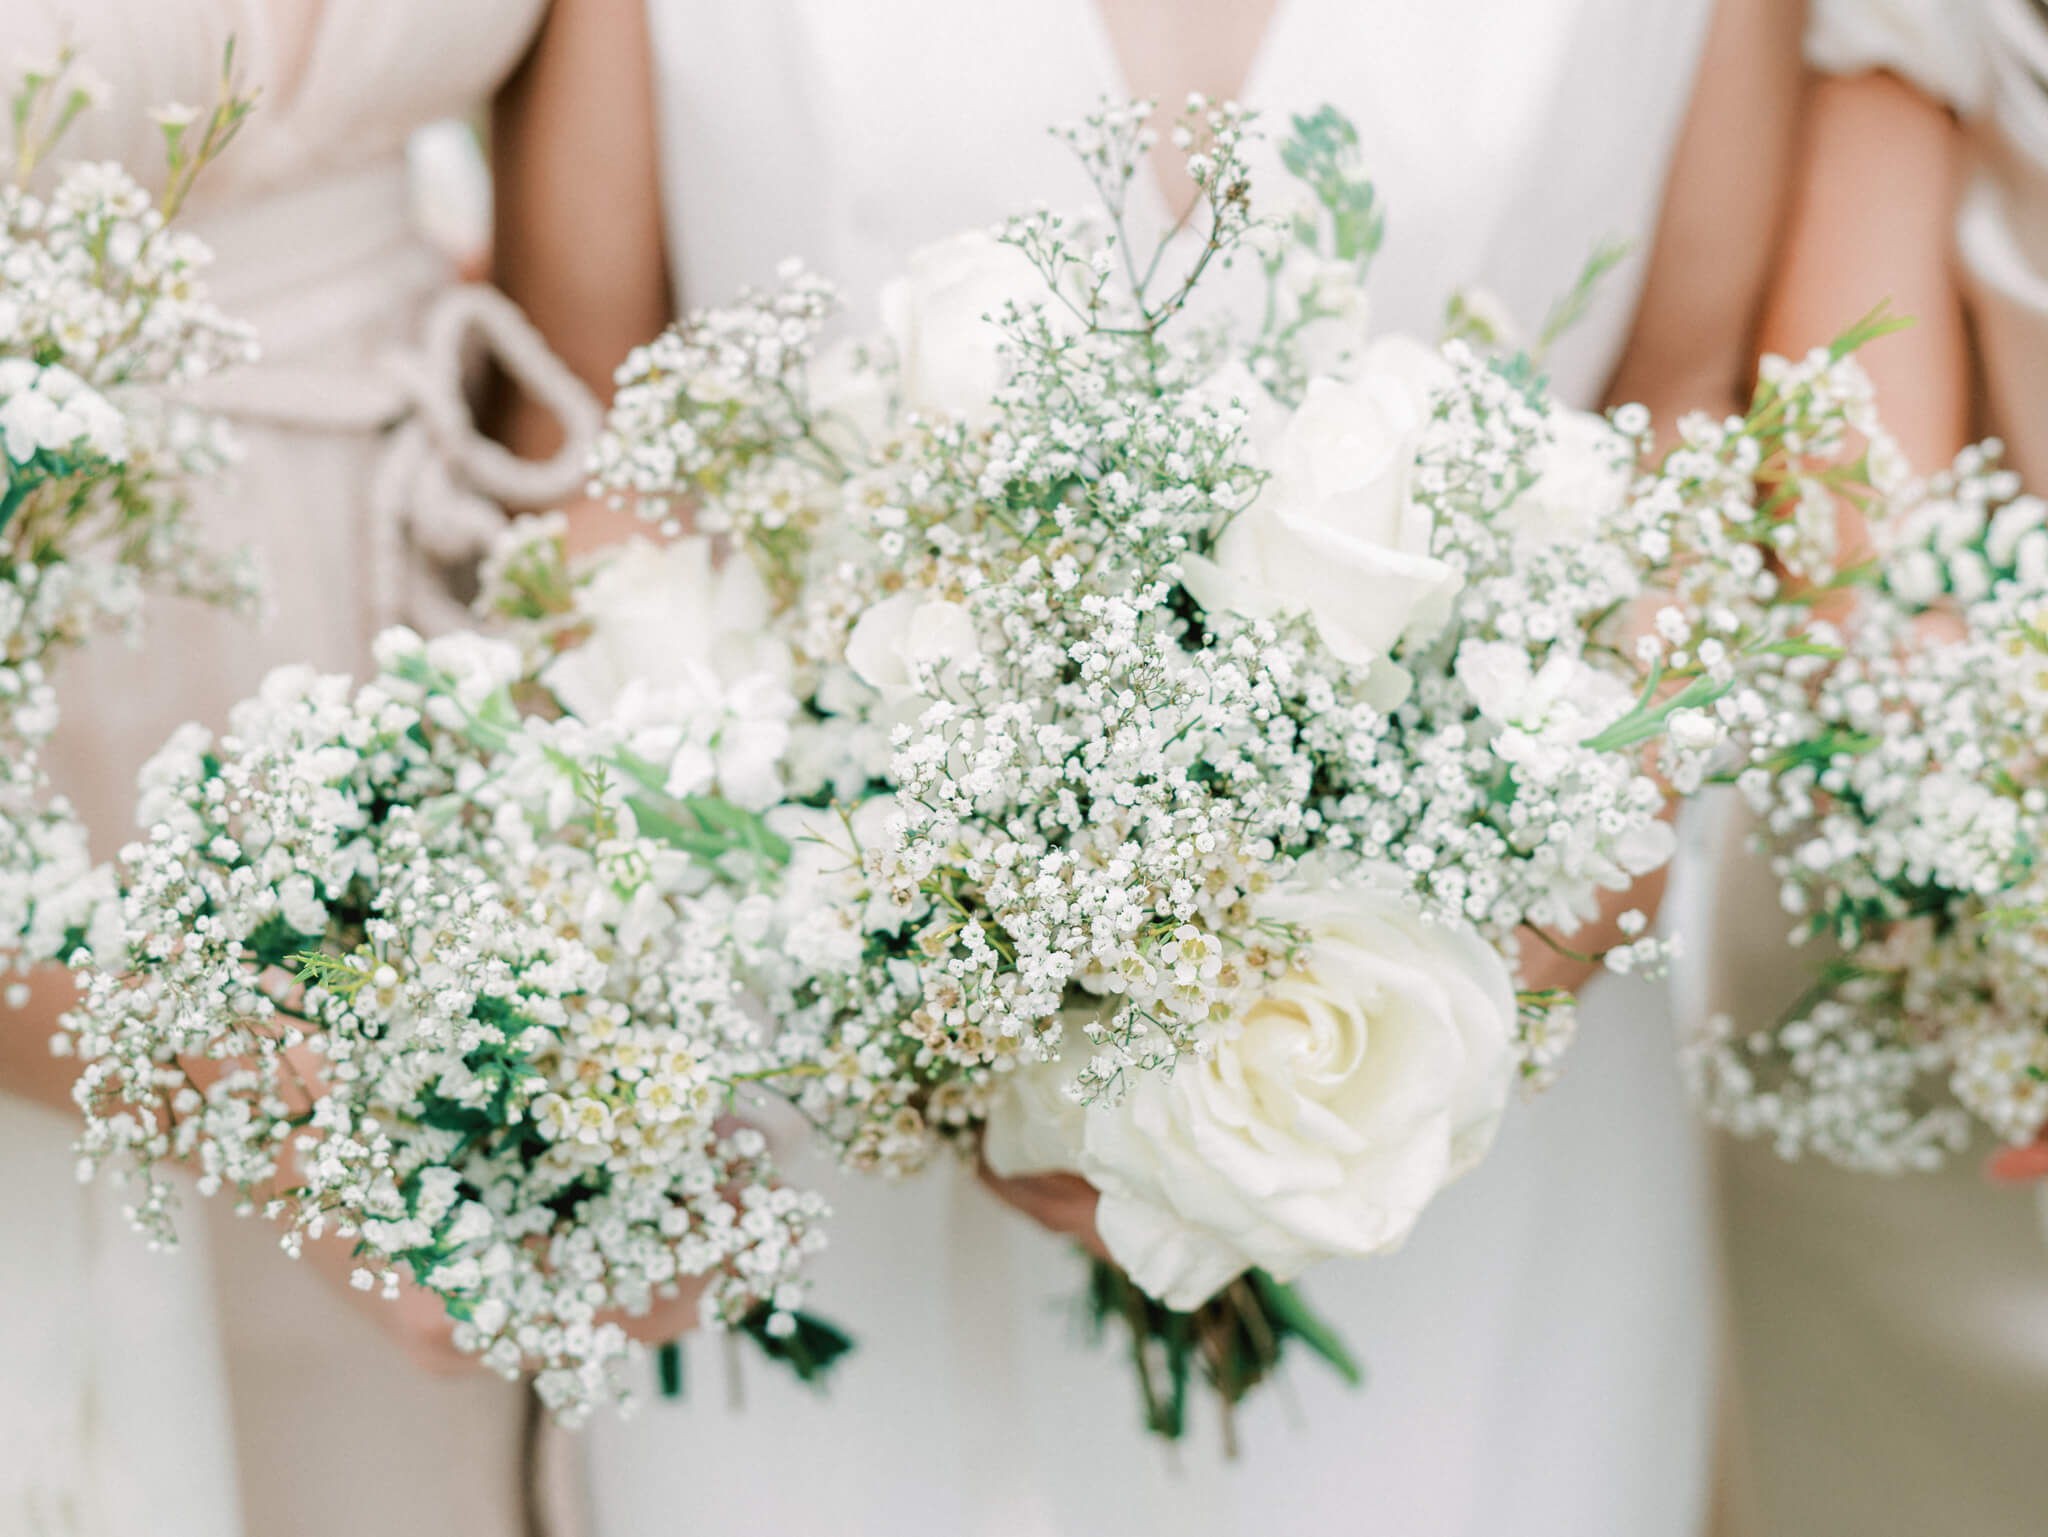 Close-up of the bouquets a bride and her bridesmaids are holding made of white roses and baby's breath.